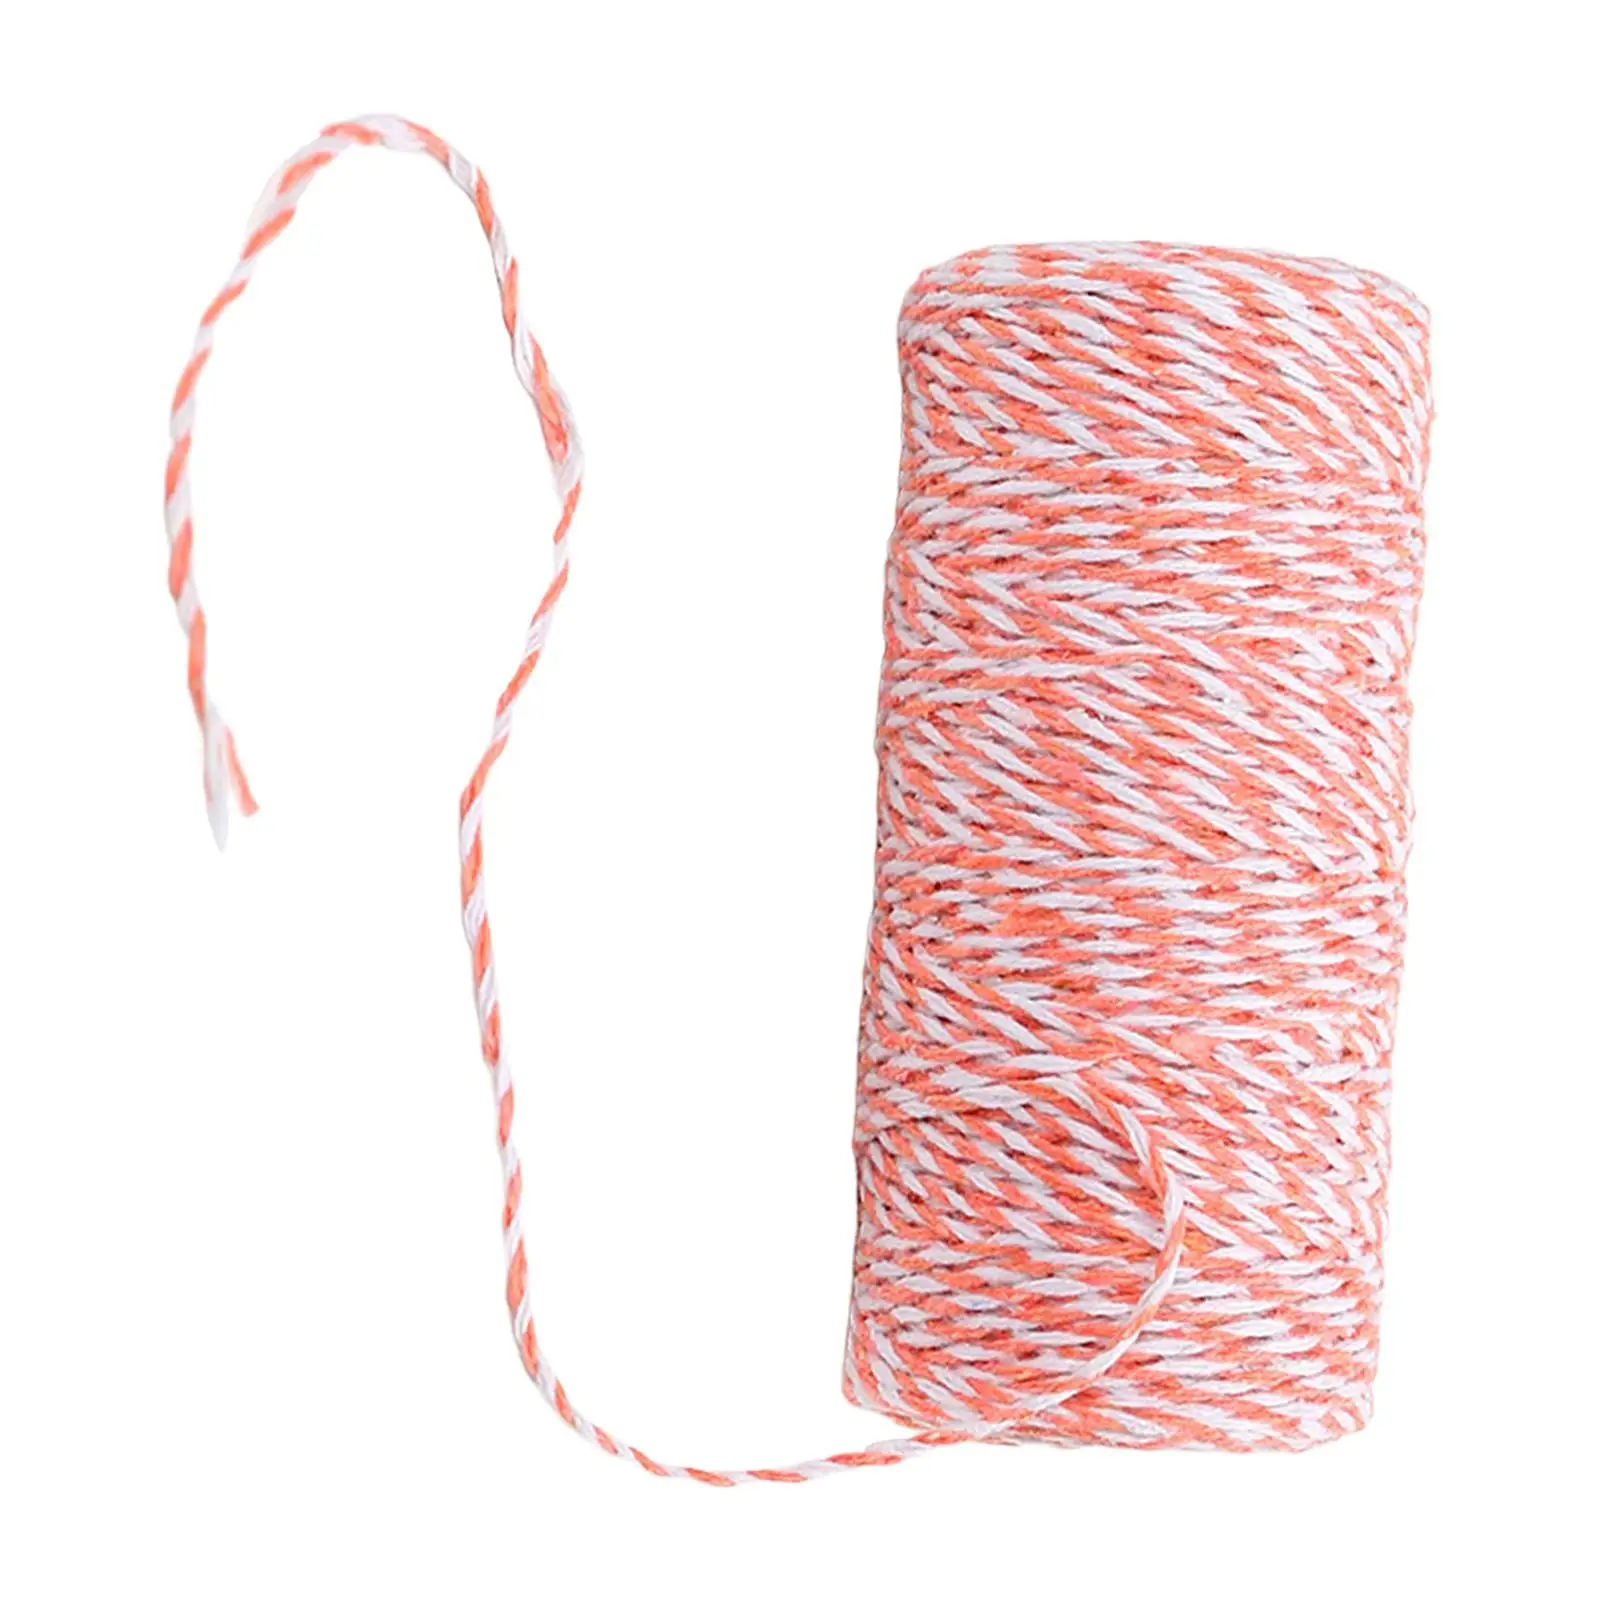 2mm Macrame Cord Rope Festive Twine Packing String for Embellishments Home Sewing Party Gift Wrapping